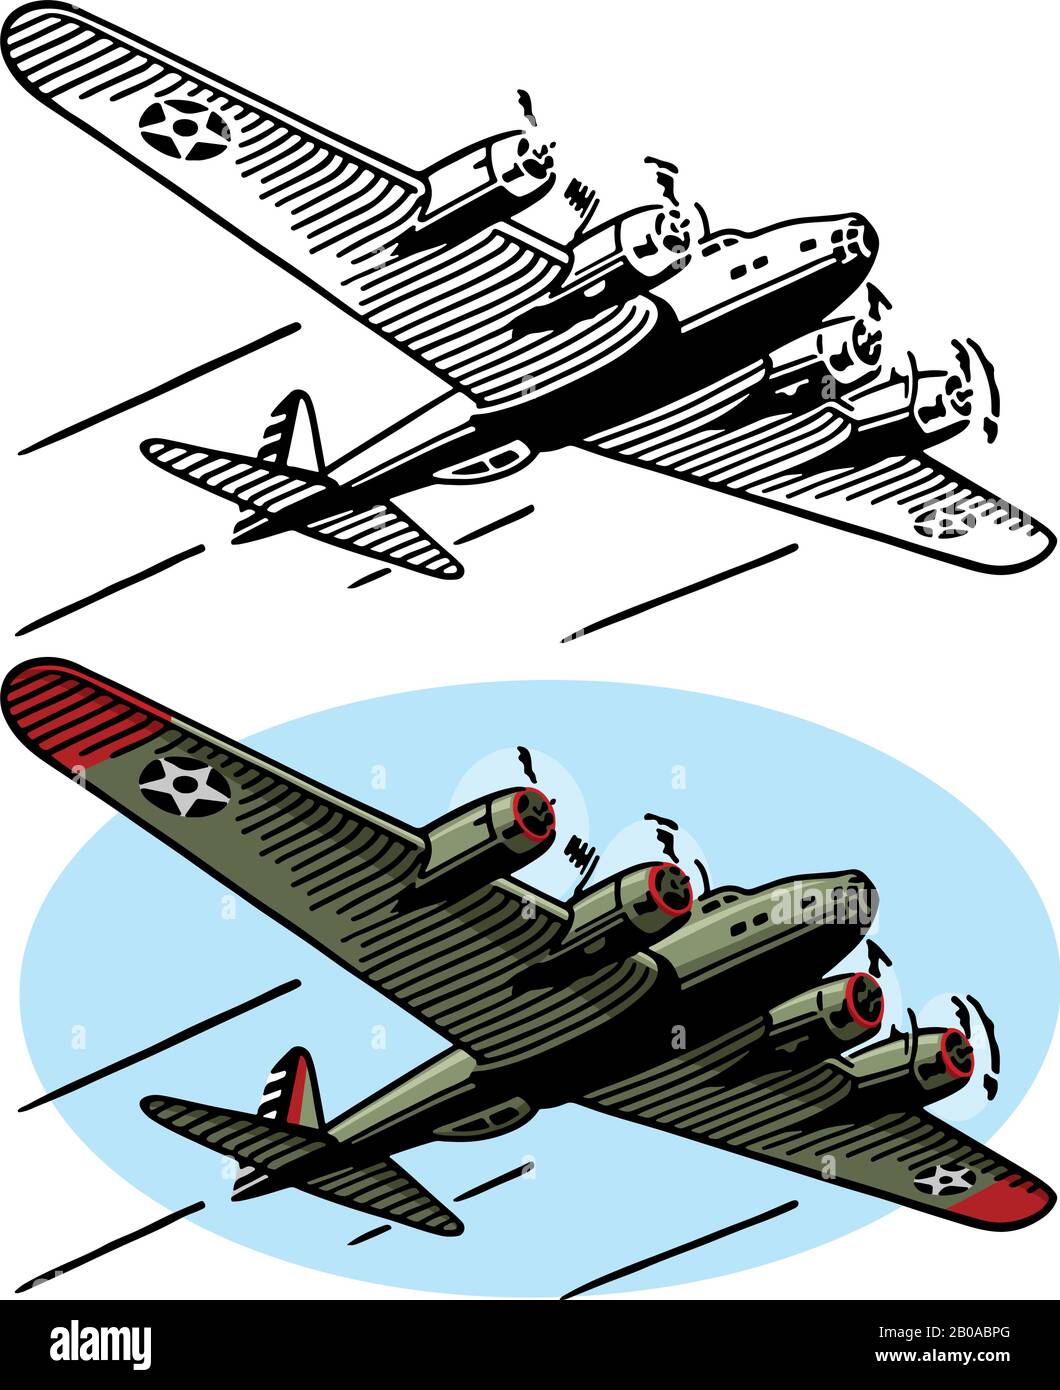 A drawing of the American World War II aircraft the B-17 bomber. Stock Vector